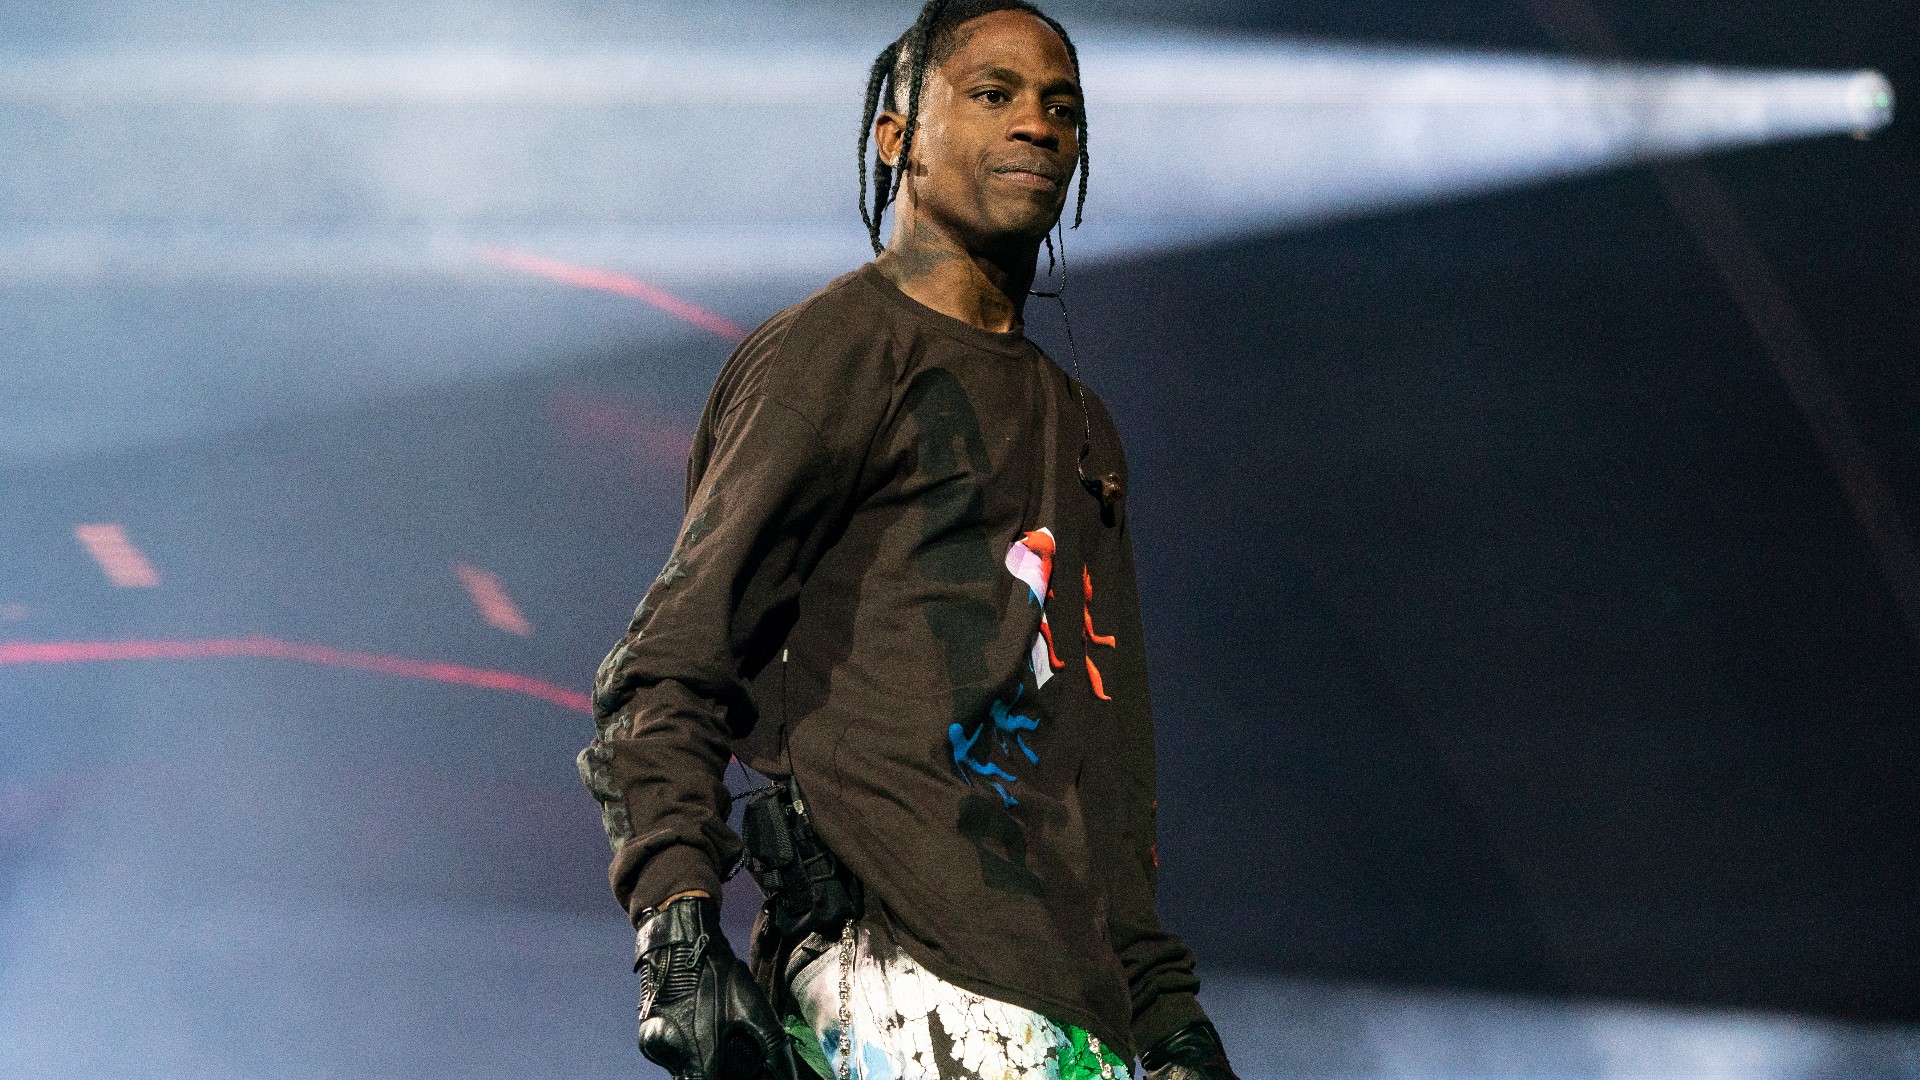 Apple Music, Travis Scott and others are named. The lawsuit, filed by Tony Buzbee on behalf of more than 120 people, claims the event was a failure from the start.